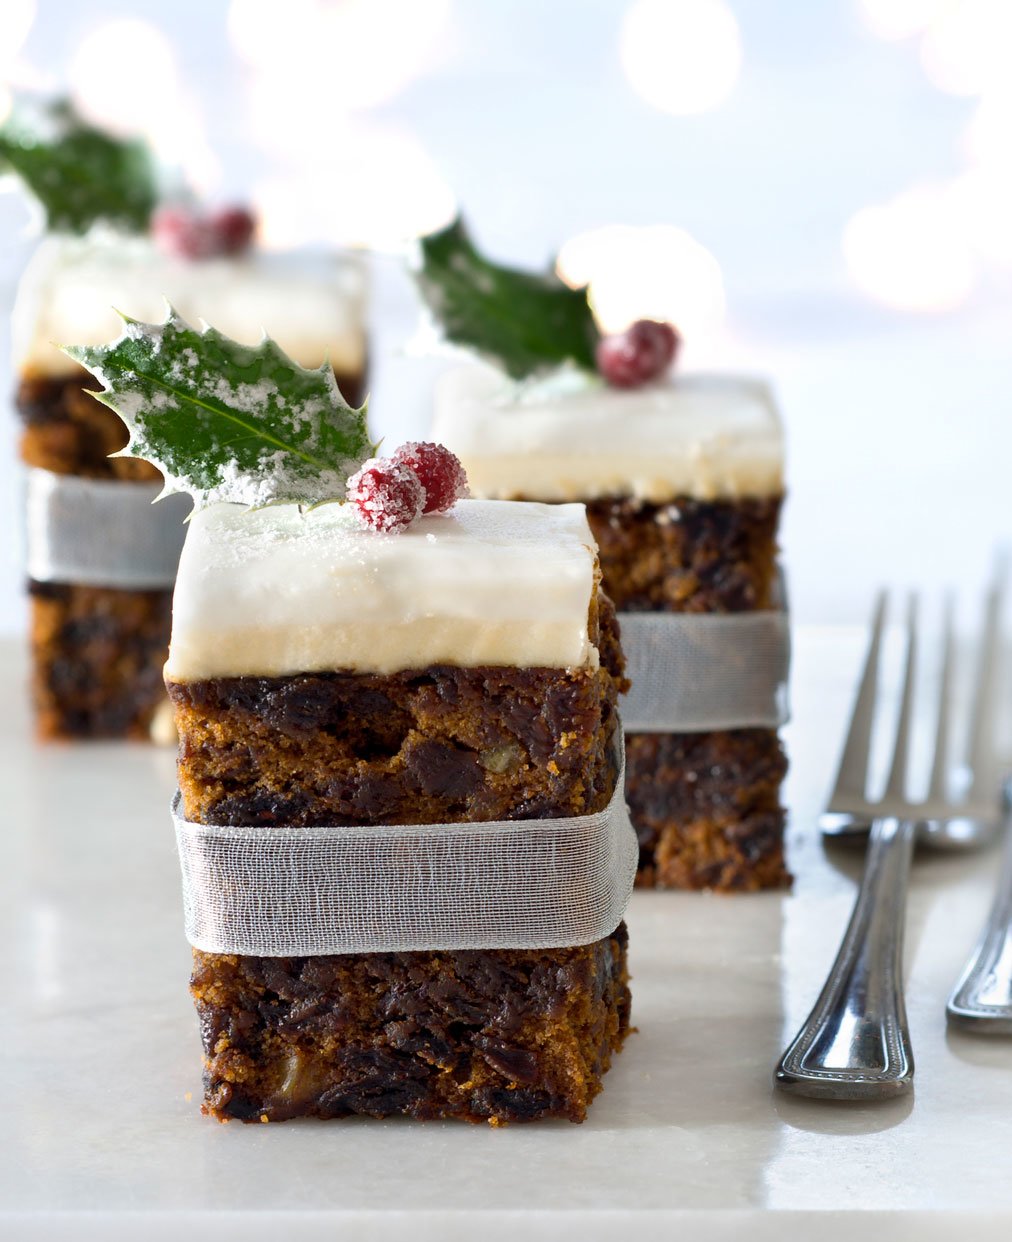 Christmas cake cut and presented on plate